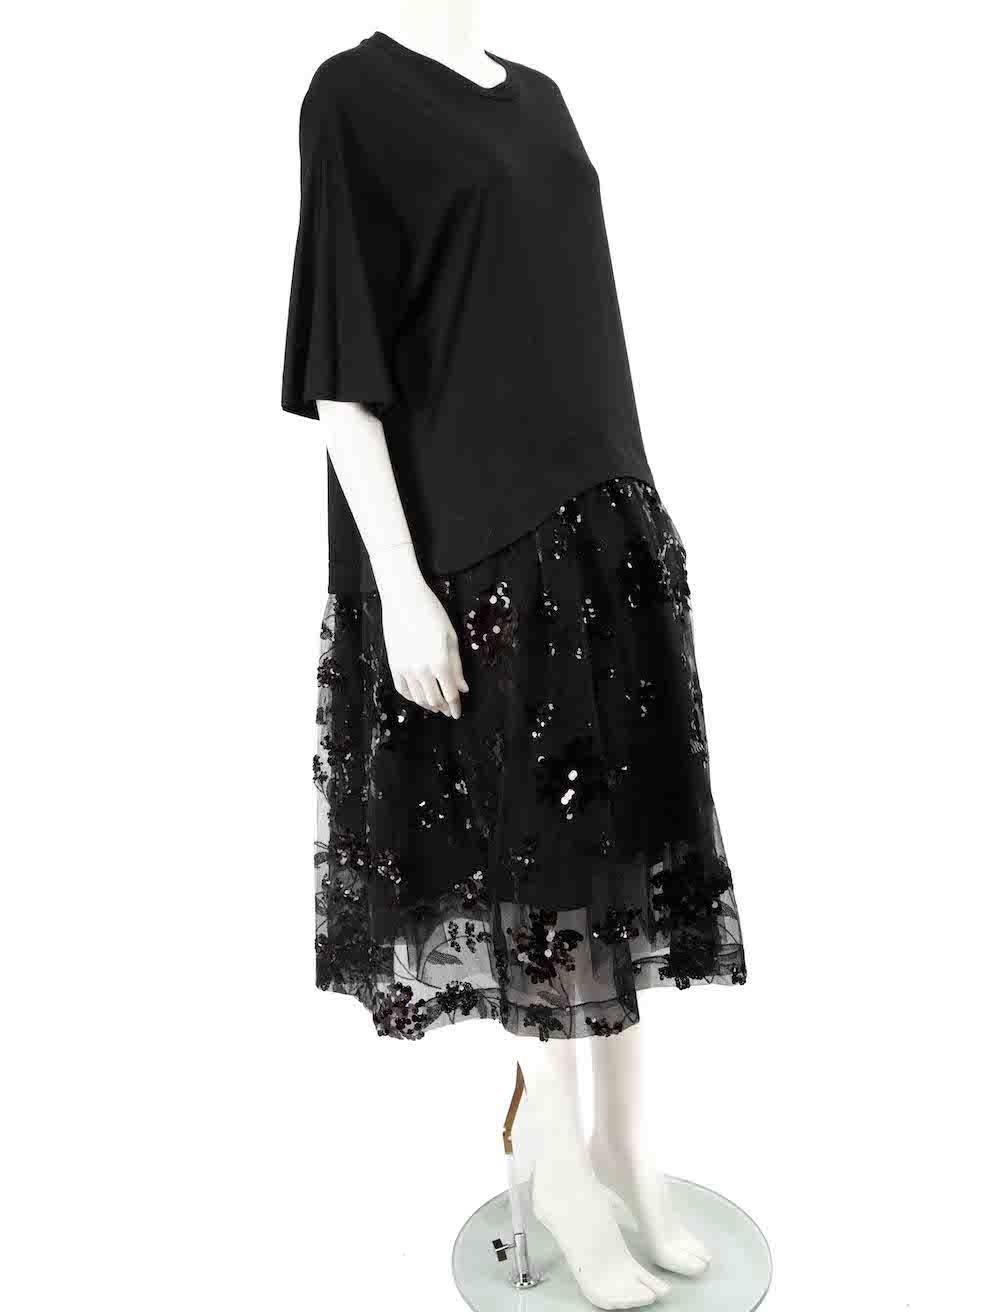 CONDITION is Very good. Minimal wear to dress is evident. Minimal wear to neckline with small discolouration on this used Simone Rocha designer resale item.
 
 
 
 Details
 
 
 Black
 
 Cotton
 
 Dress
 
 Short sleeves
 
 Midi
 
 Floral sequin